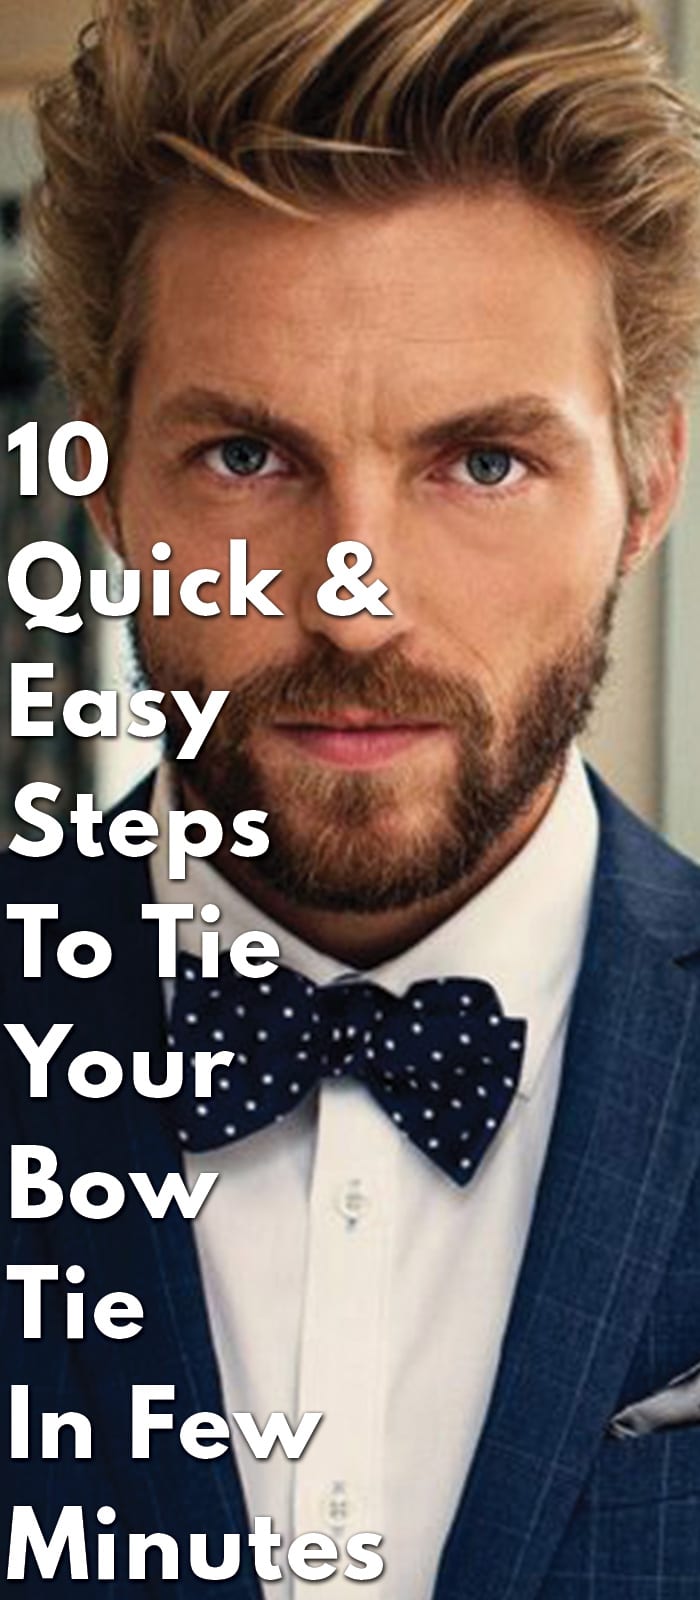 10-Quick-&-Easy-Steps-To-Tie-Your-Bow-Tie-In-Few-Minutes